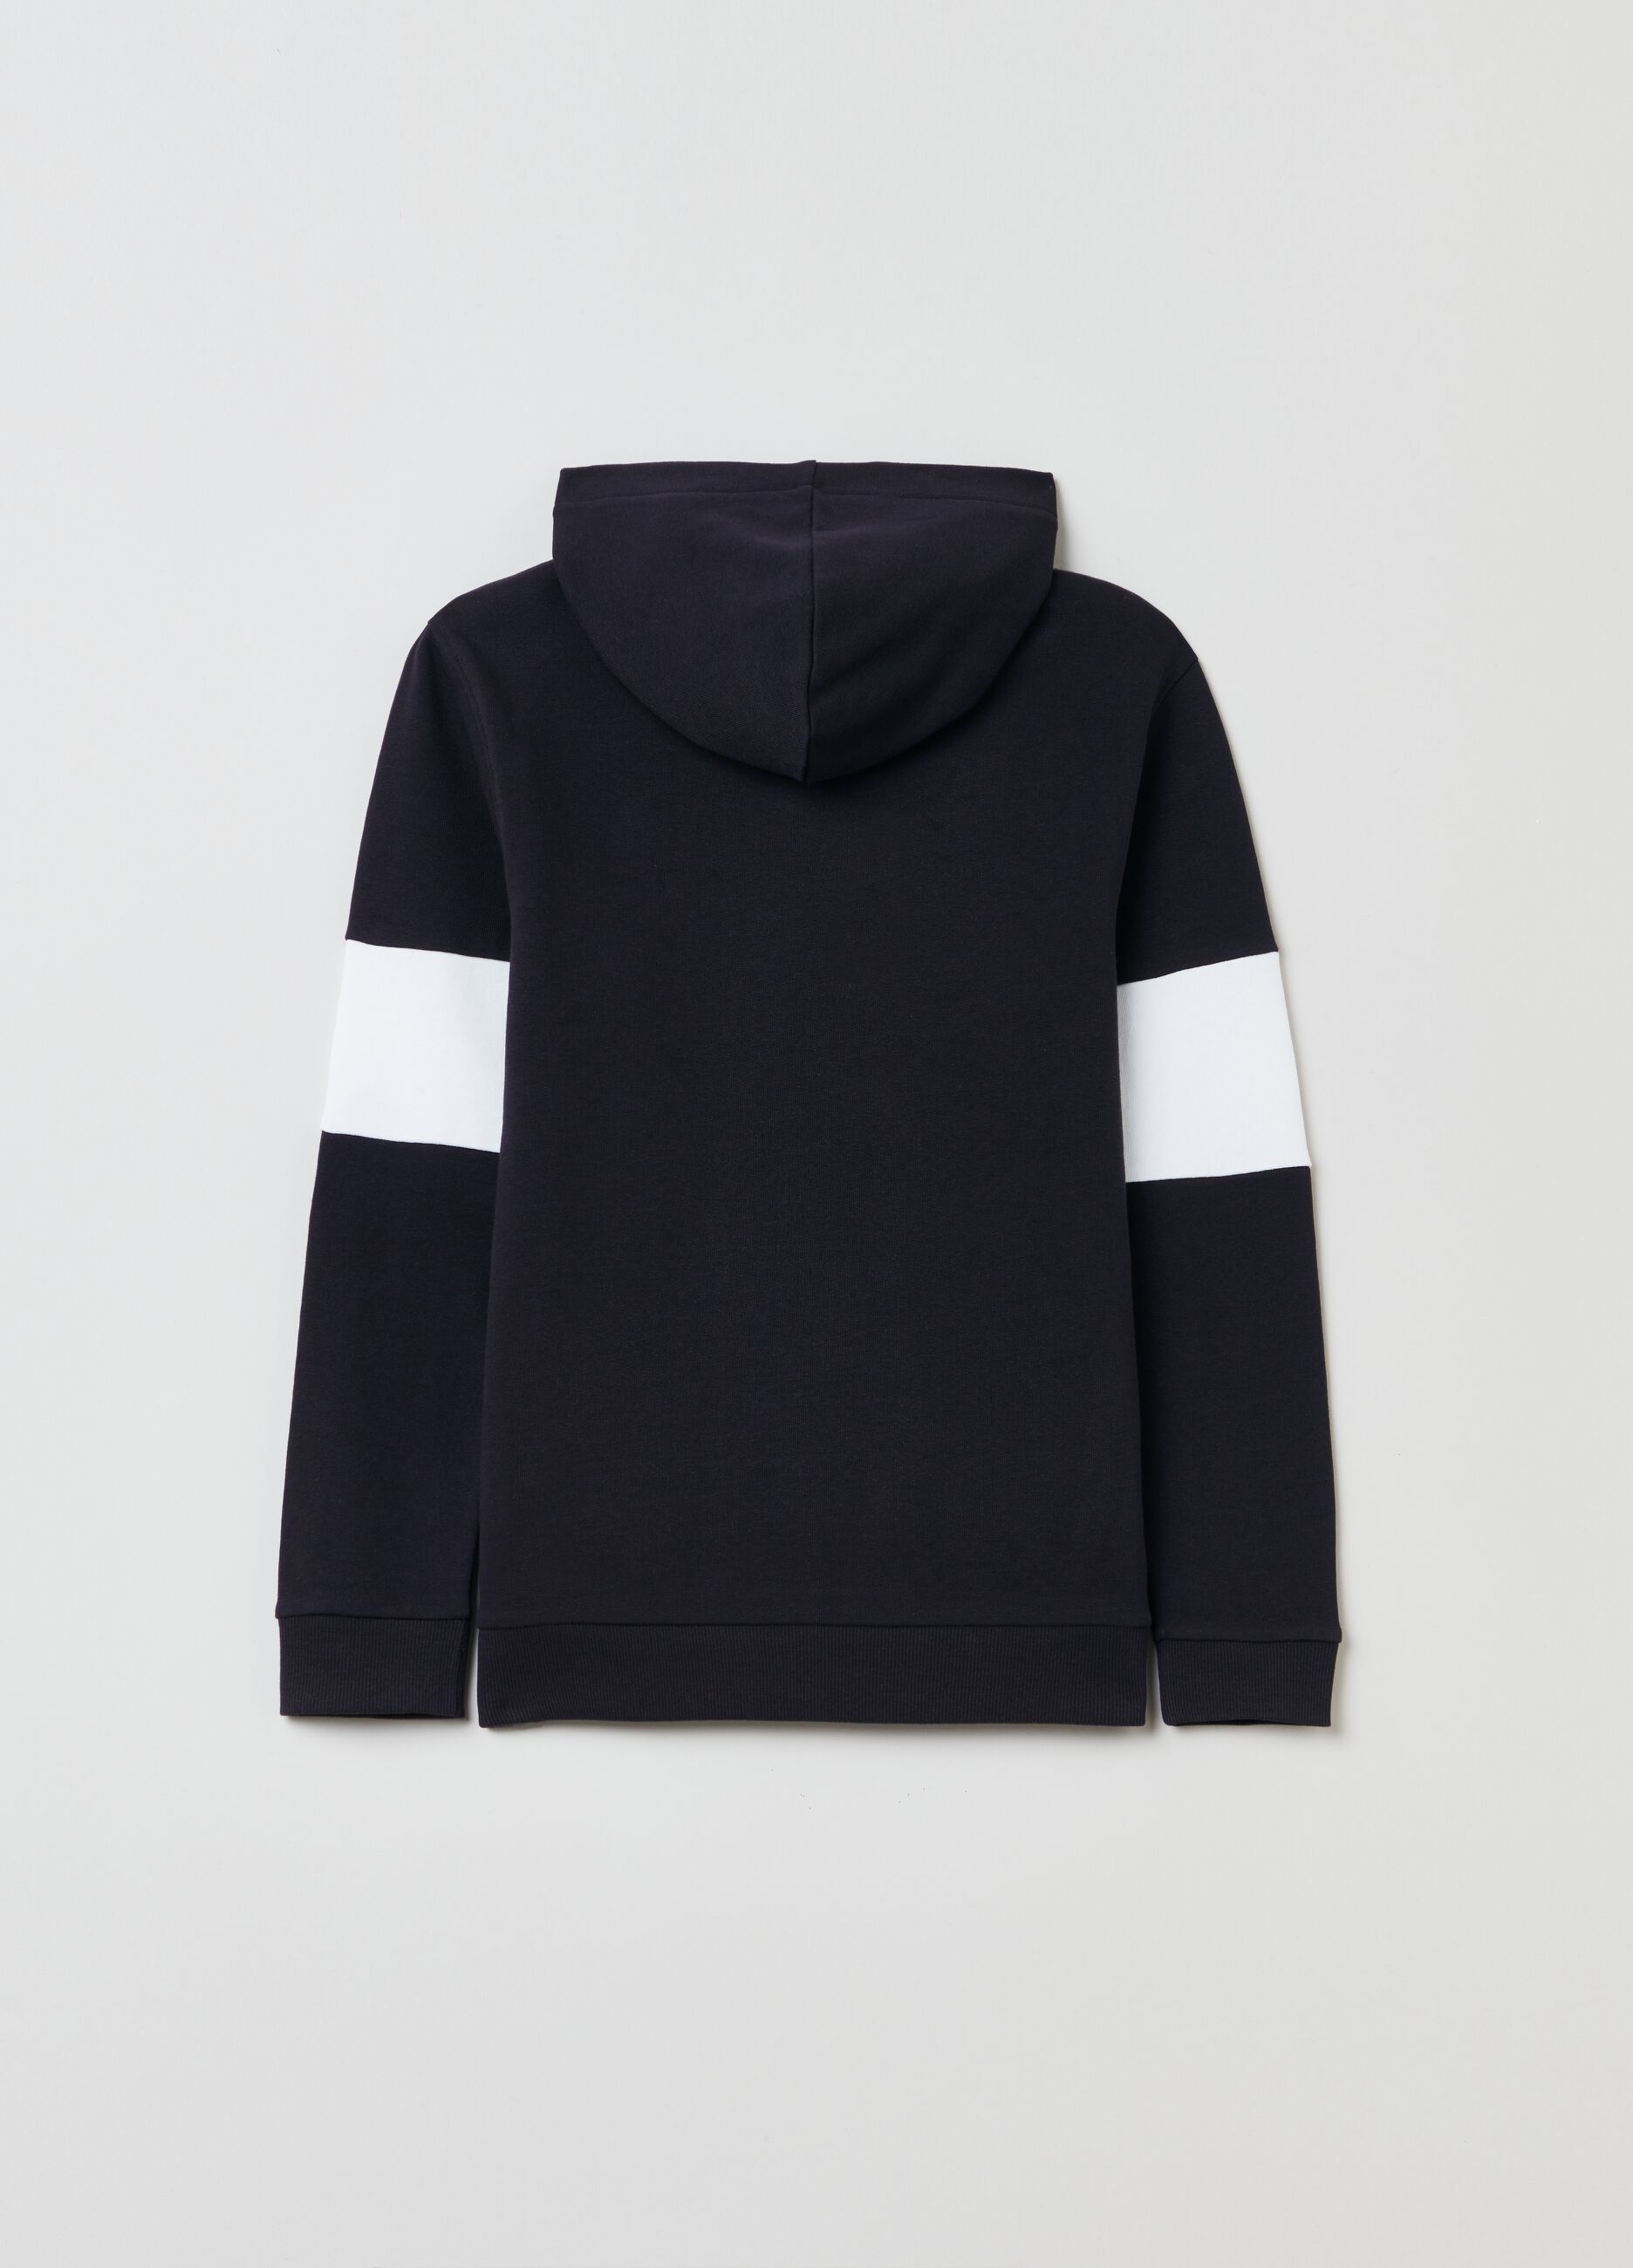 Sweatshirt with hood and contrasting bands